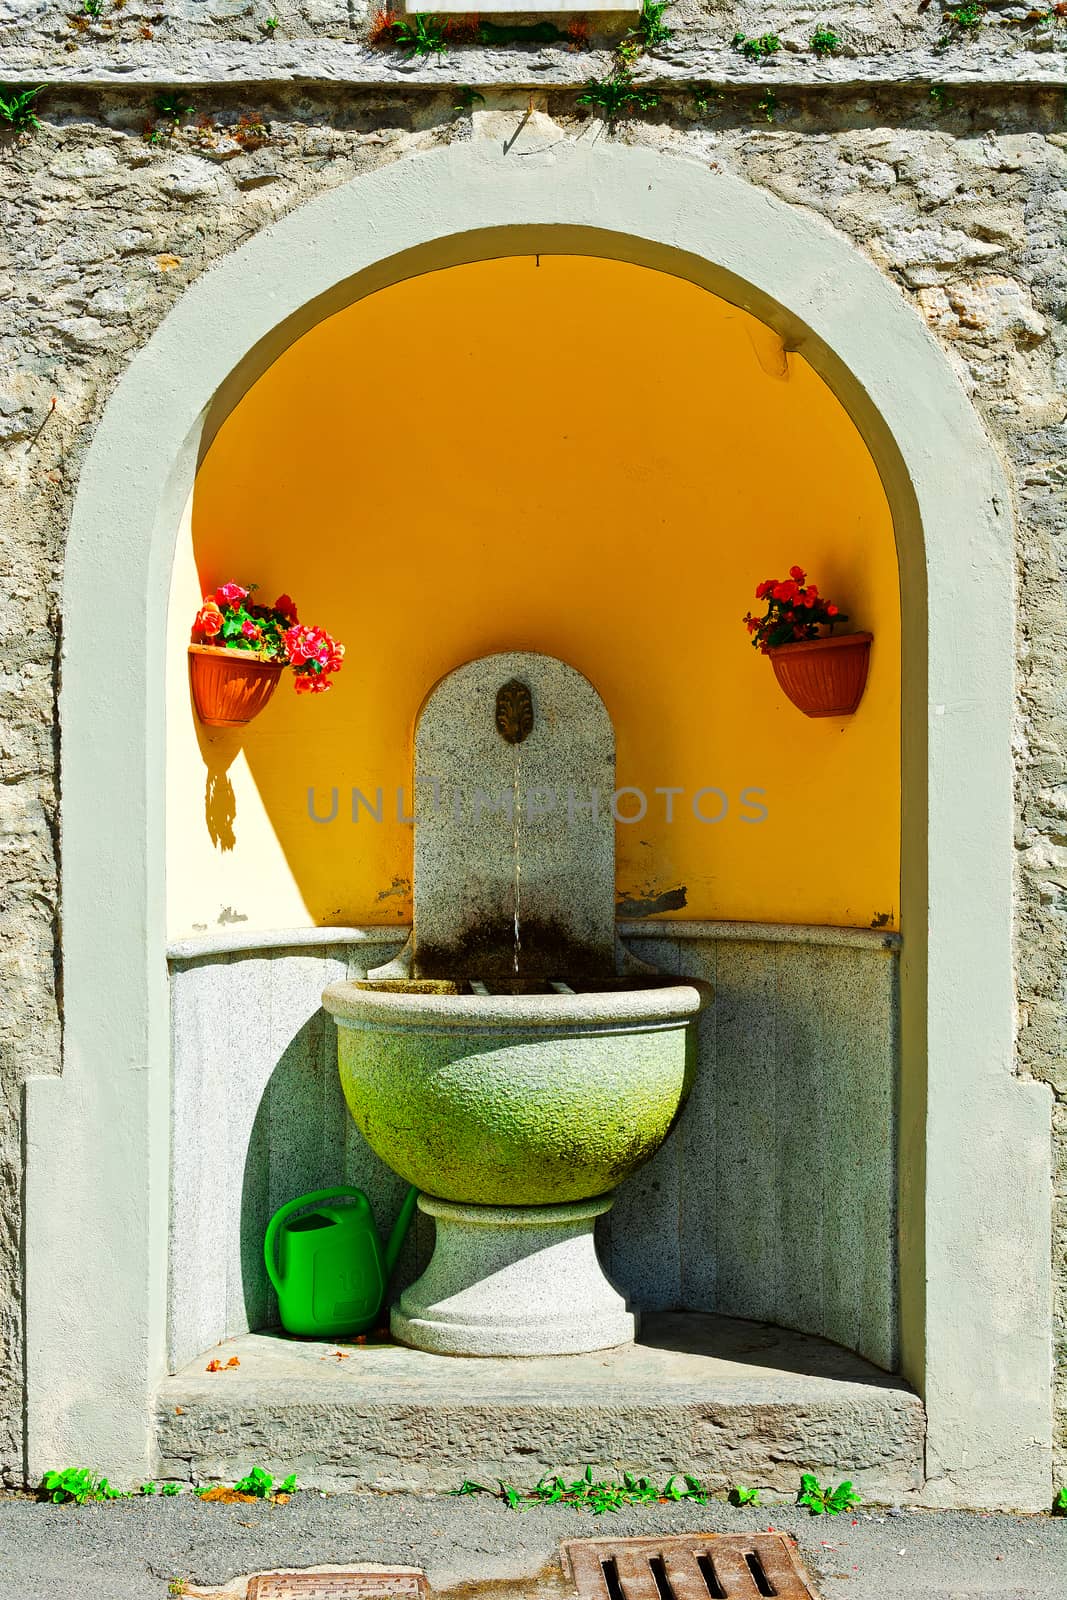 Old Drinking Fountain in Italy